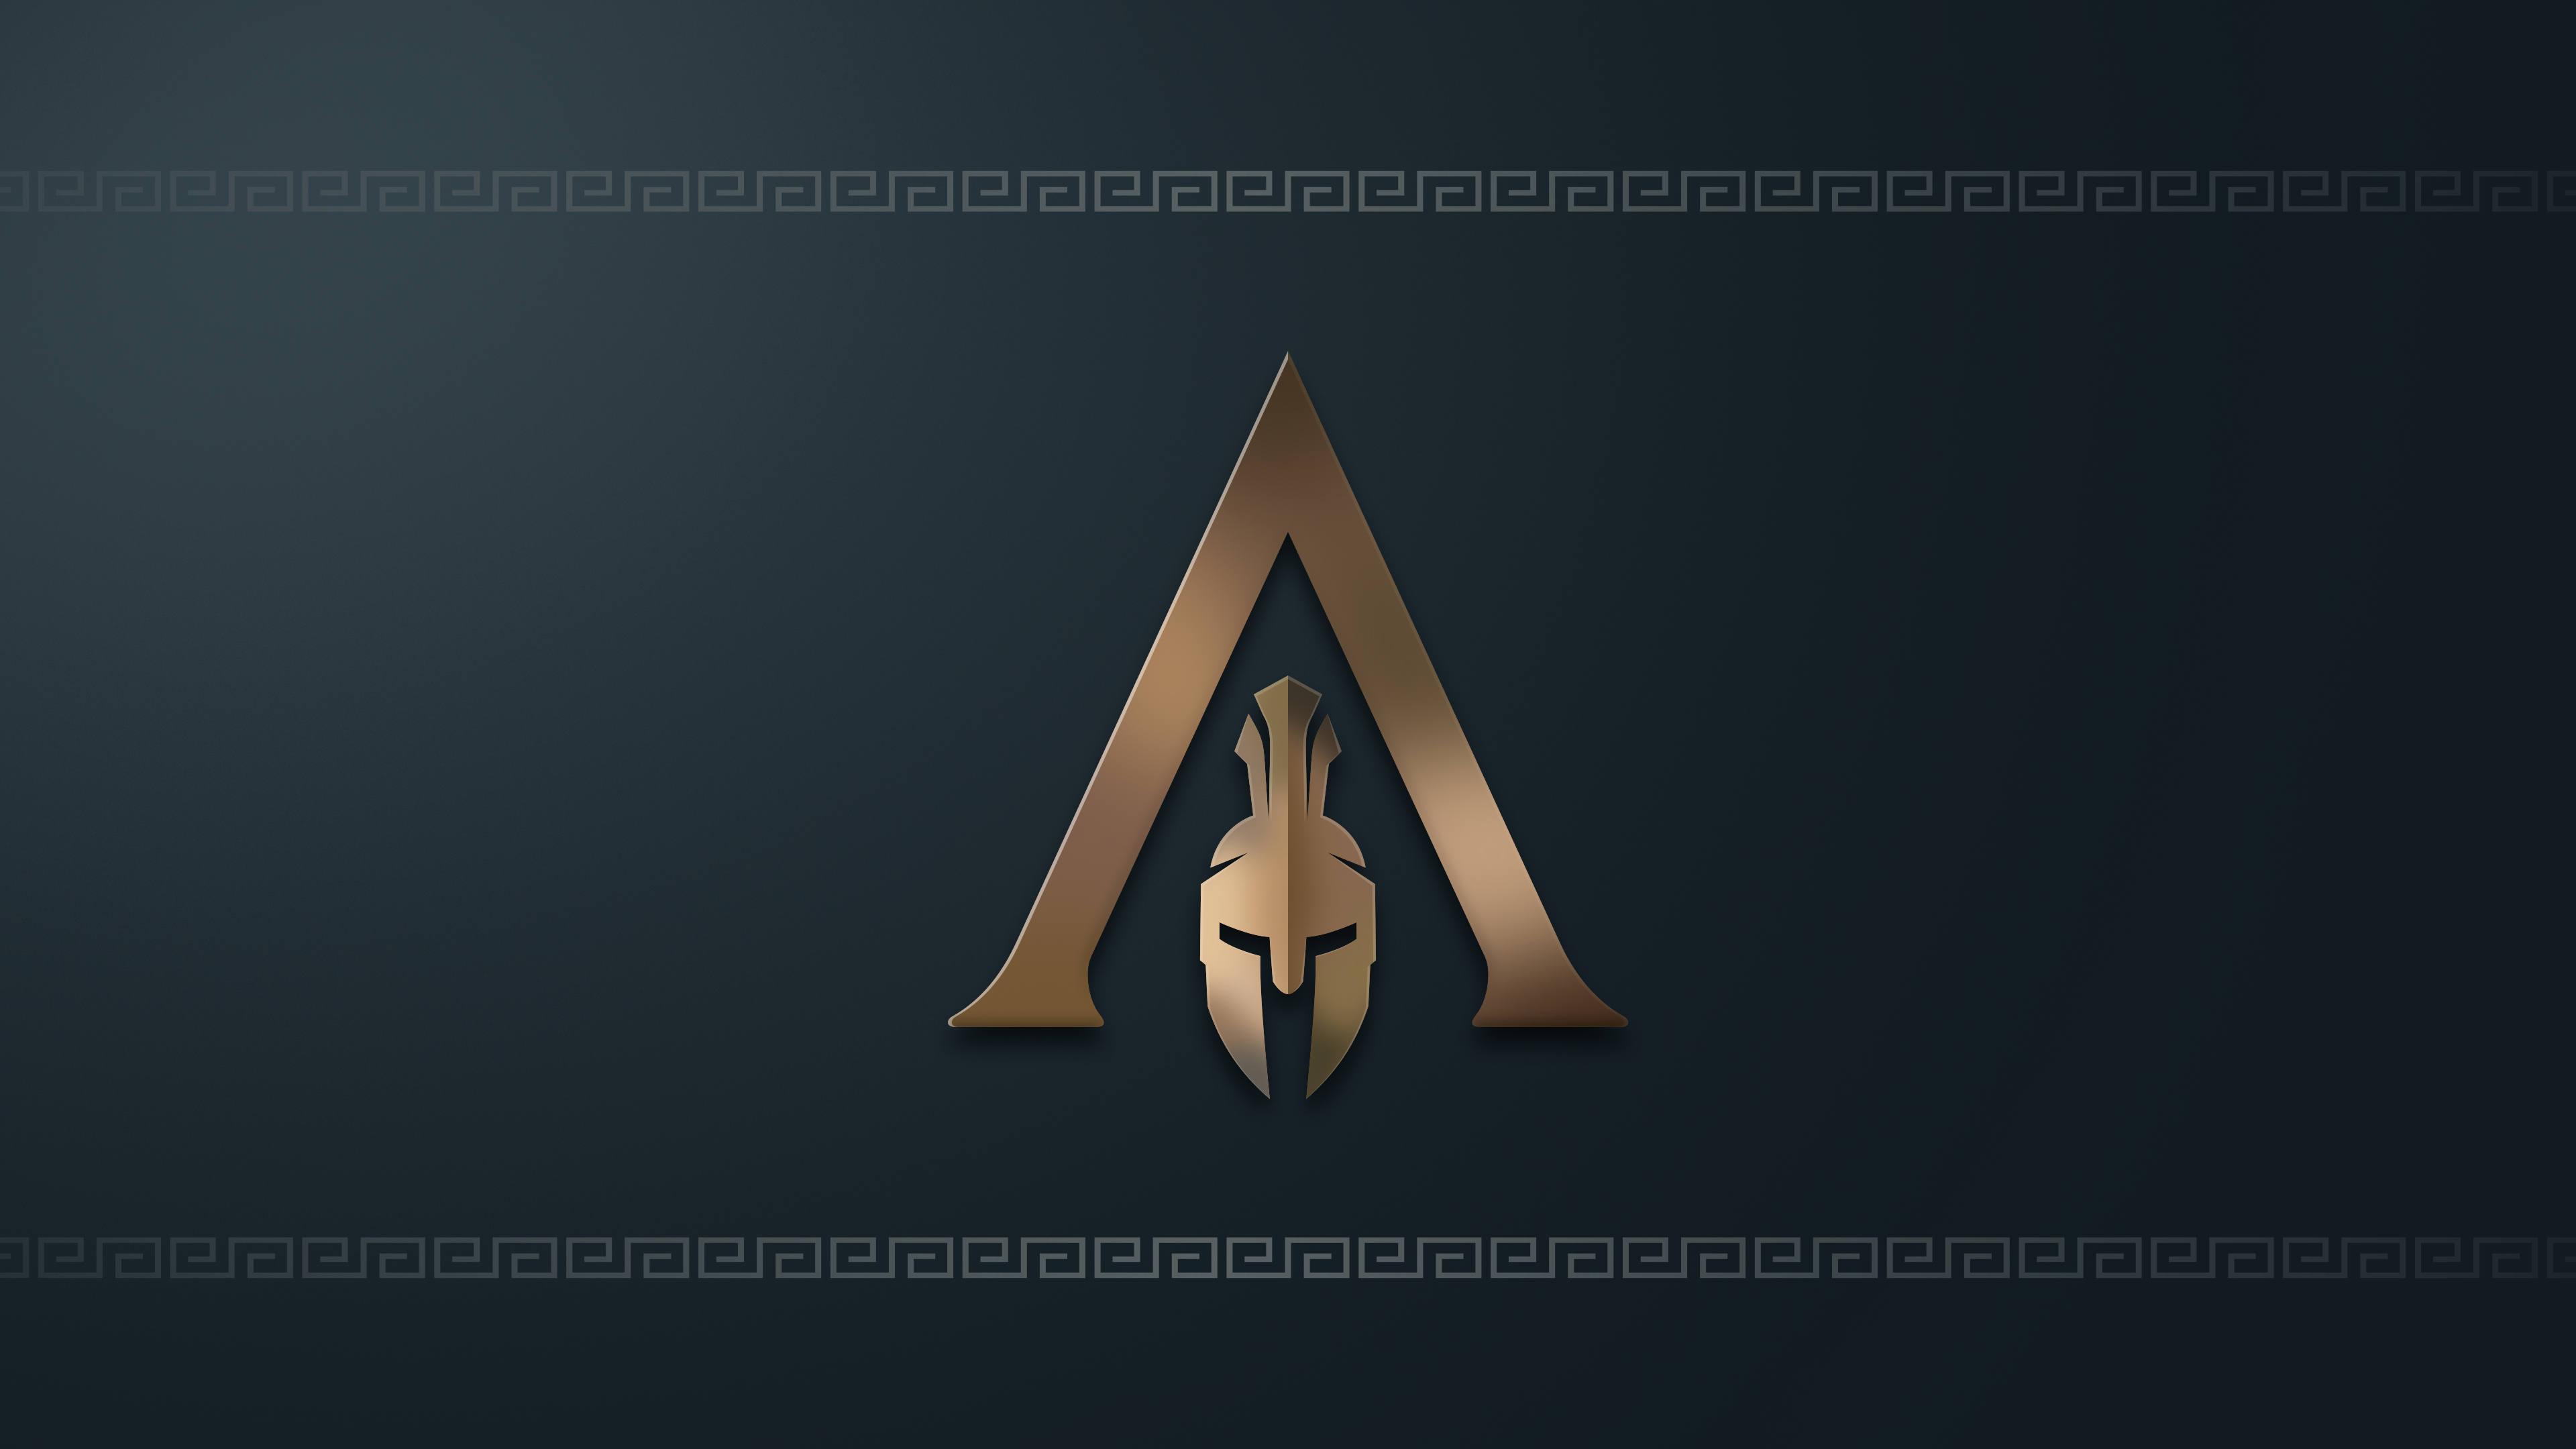 assassin's creed odyssey, spartan, assassin's creed, video game cellphone